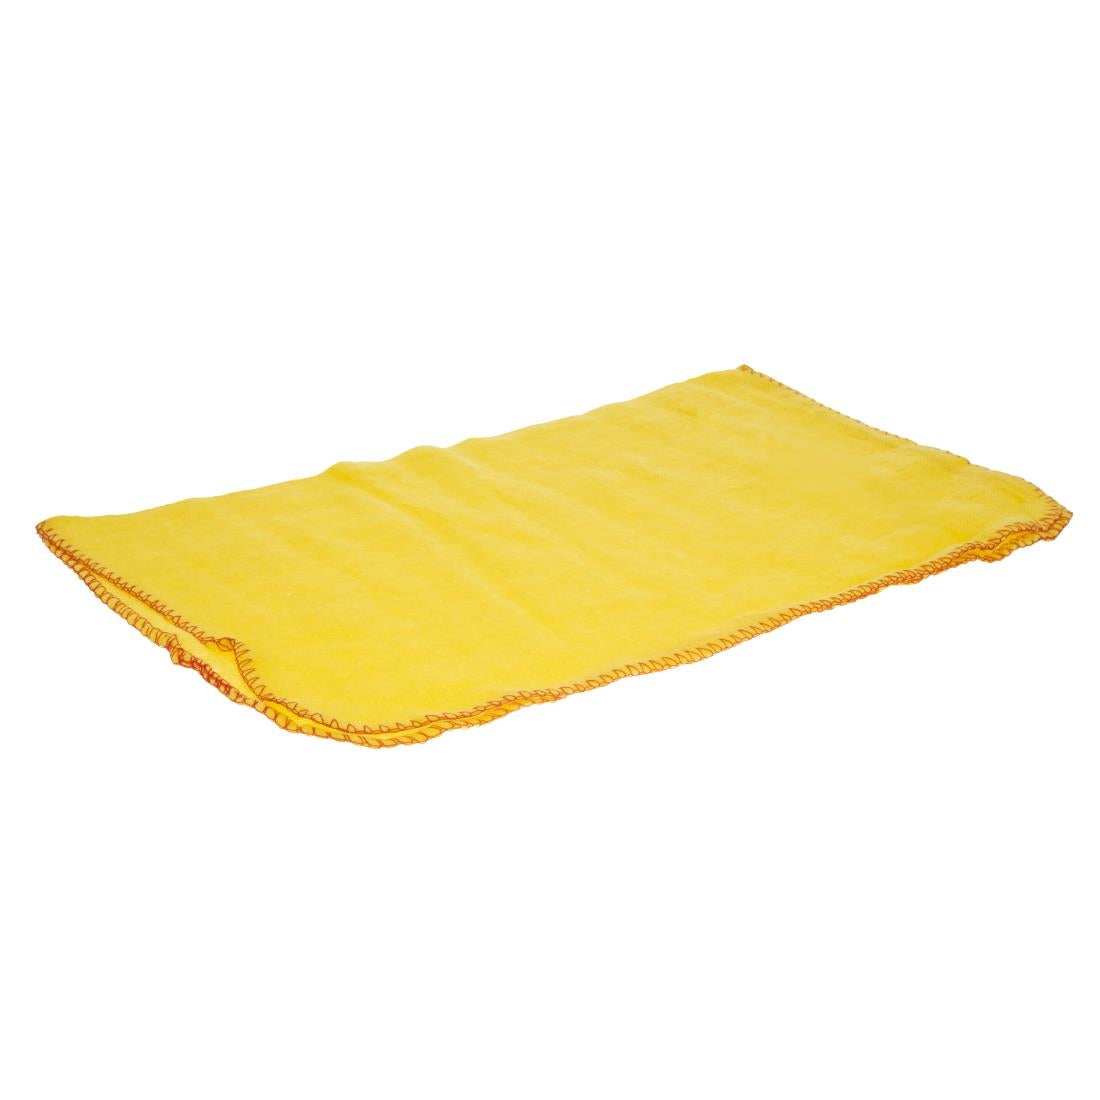 Jantex Yellow Dusters (Pack of 10) JD Catering Equipment Solutions Ltd